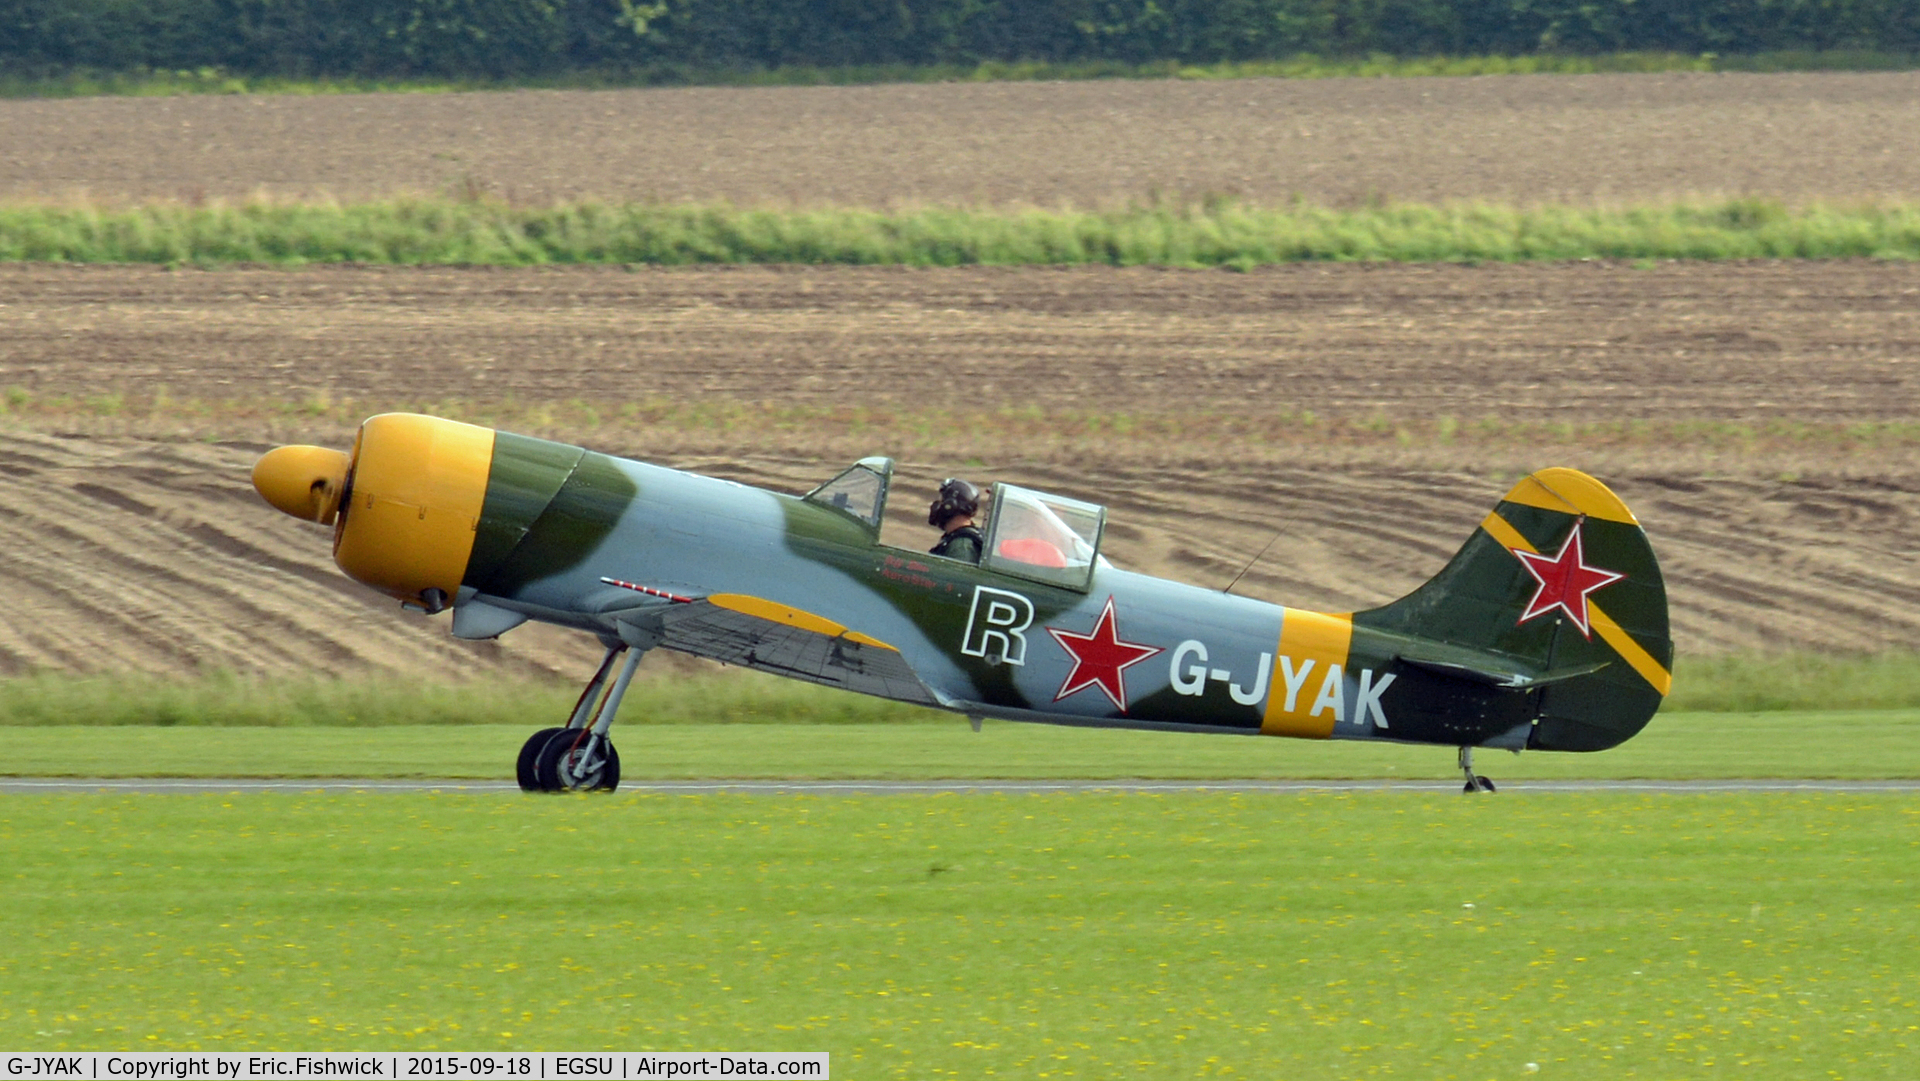 G-JYAK, 1985 Yakovlev Yak-50 C/N 853001, 1. G-JYAK arriving on the eve of The Battle of Britain (75th.) Anniversary Air Show, Sept. 2015.